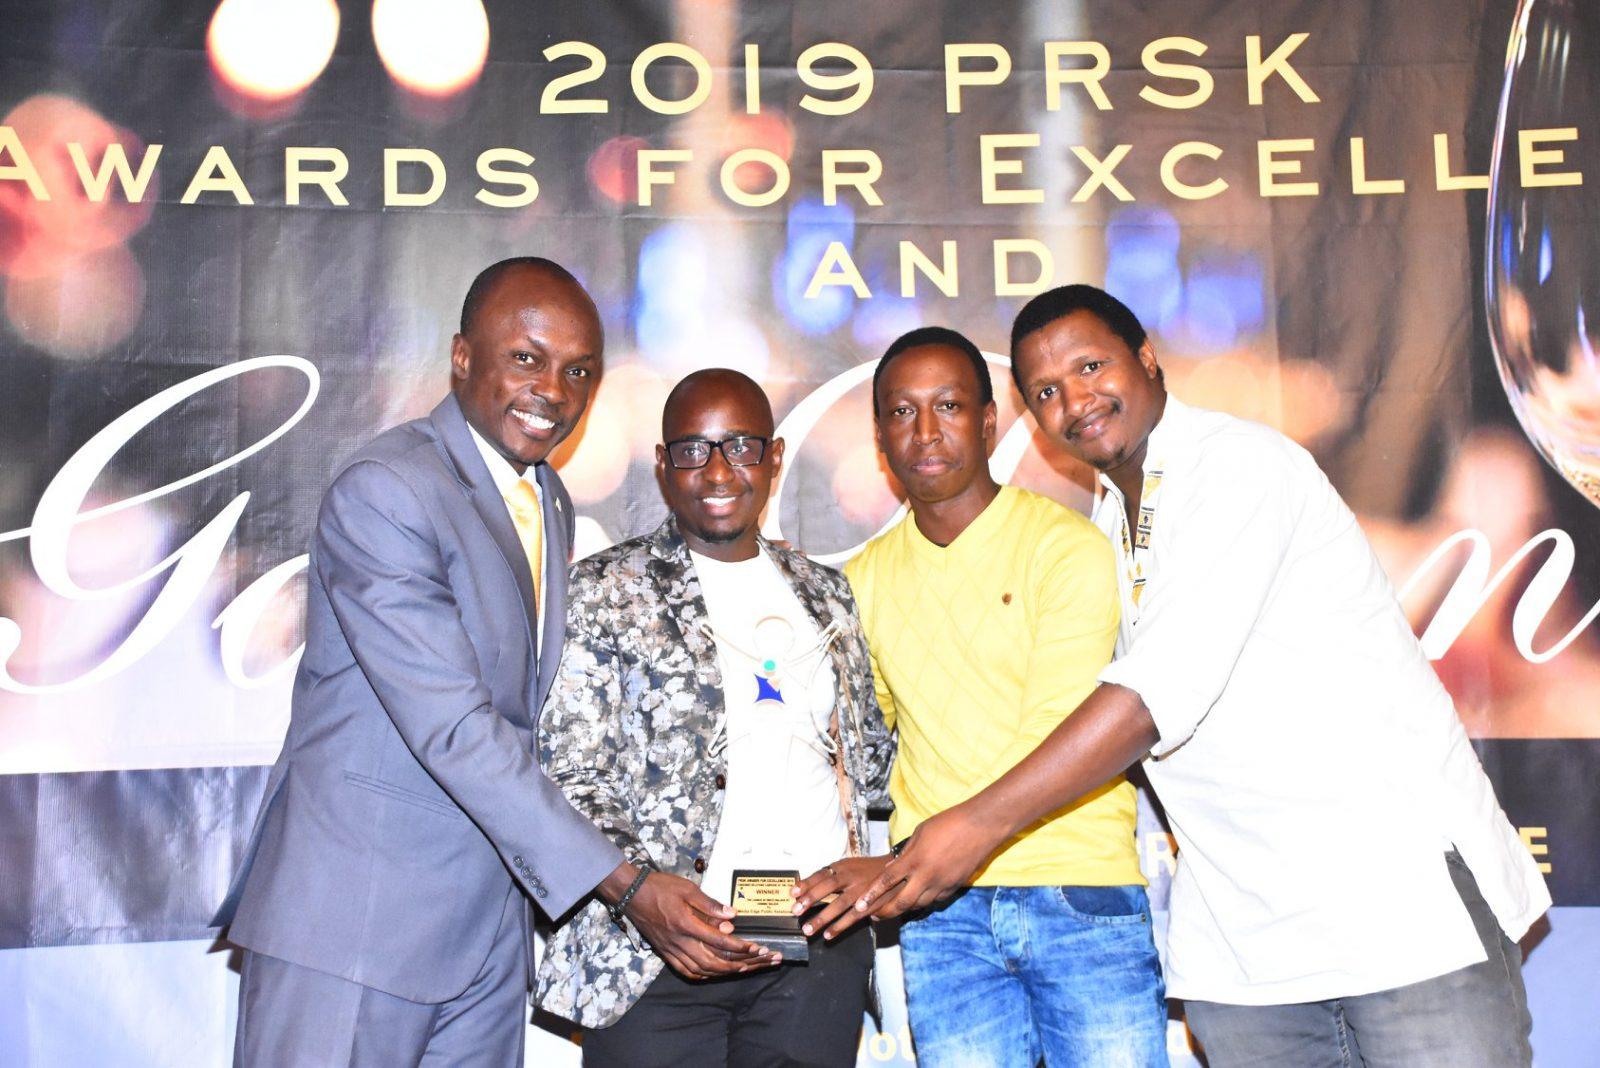 Media Edge PR receiving the Overall PR Campaign of the year award. This was during the 2019 PRSK Awards for Excellence Gala. www.theexchange.africa